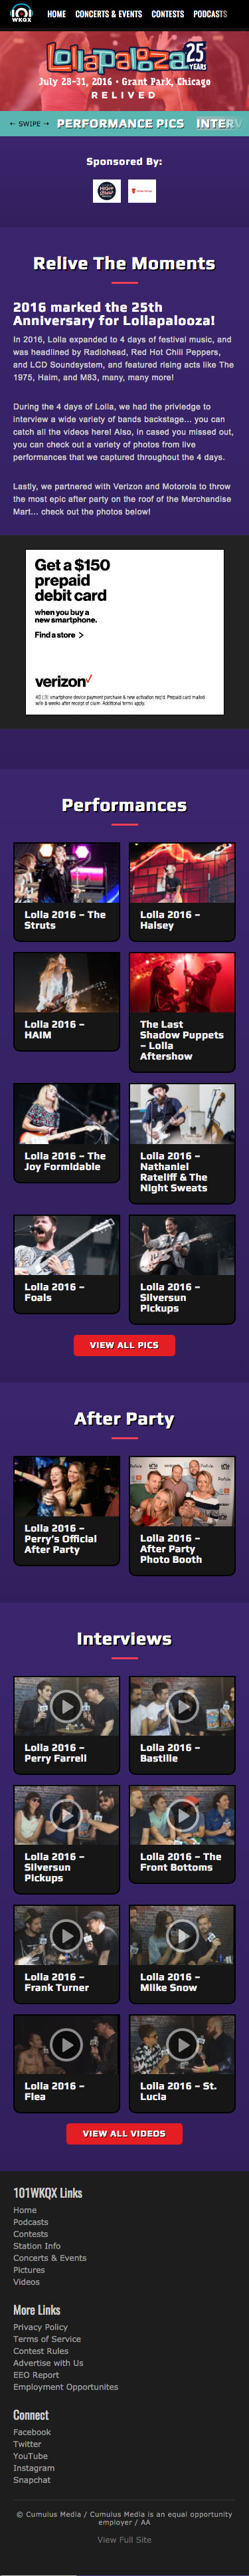 Lolla - Relived 2016 Landing Page - iPhone